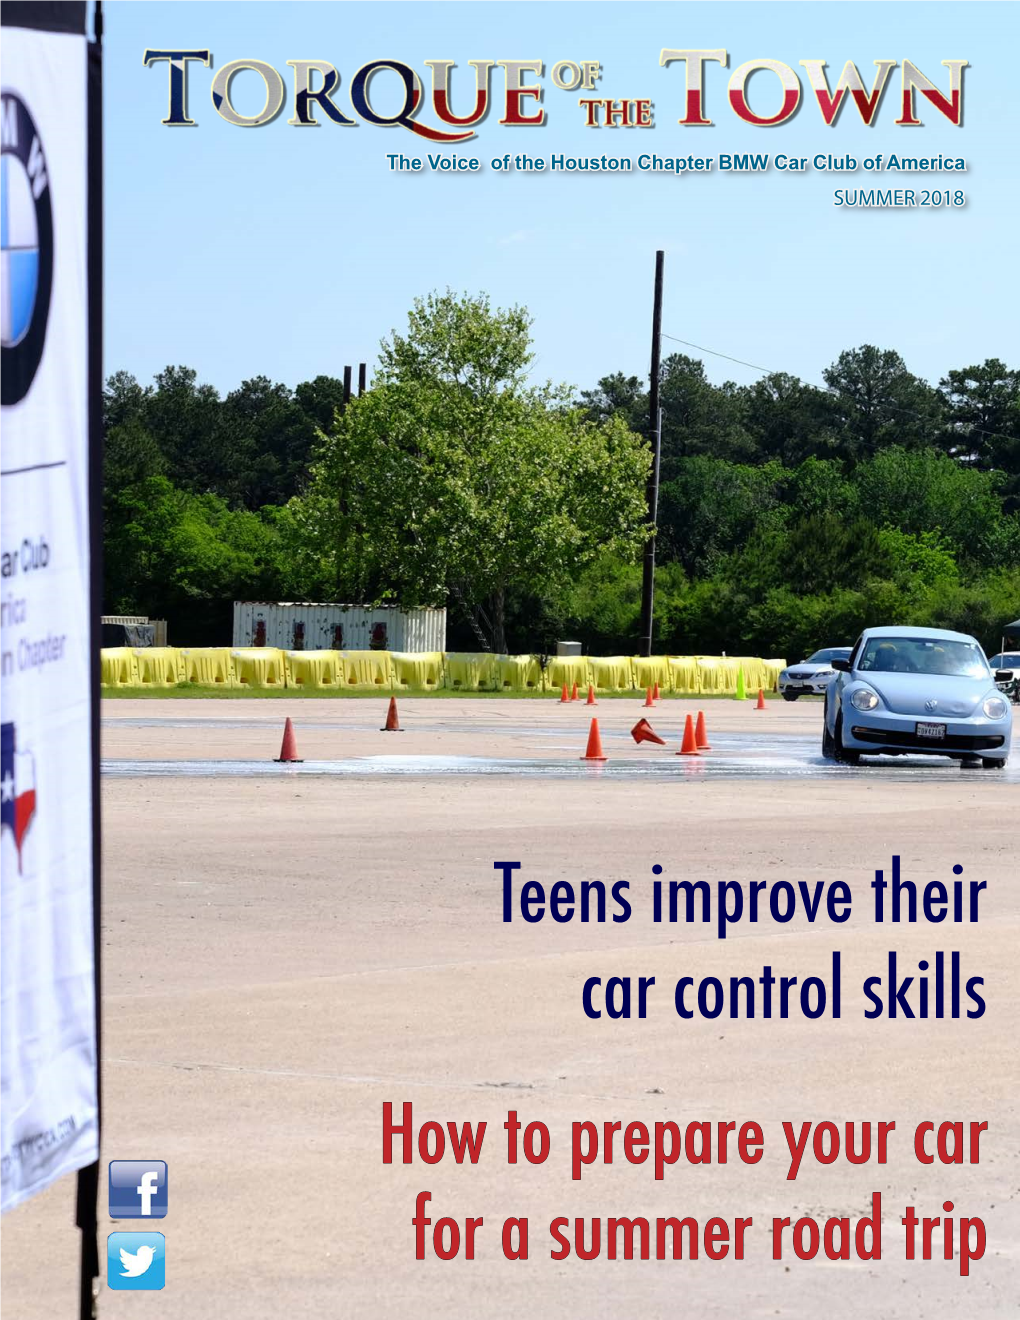 Teens Improve Their Car Control Skills How to Prepare Your Car for a Summer Road Trip Post Office Box 56763 Houston, TX 77256-6763